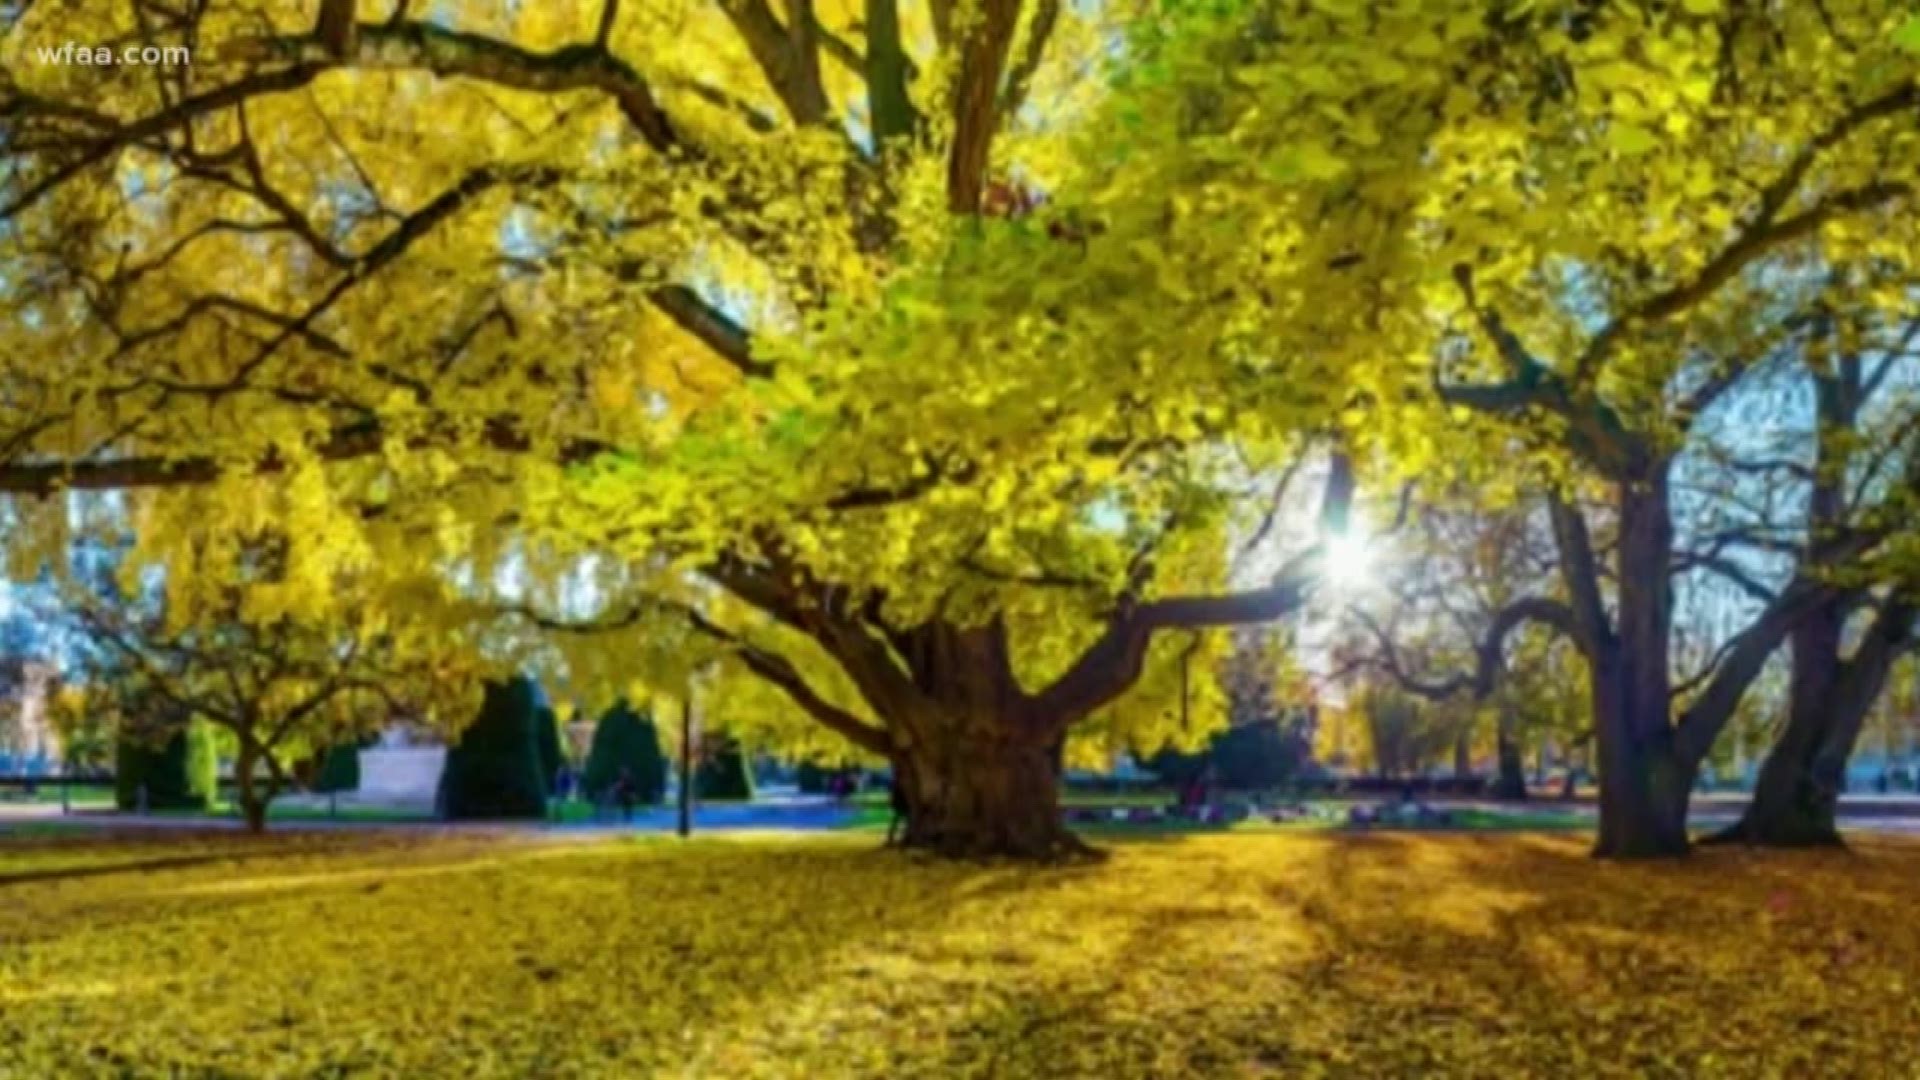 UNT researcher and professor Richard Dixon studied groups of ginkgo trees from China that were between 20 and 600 years old. He noticed an interesting trend.